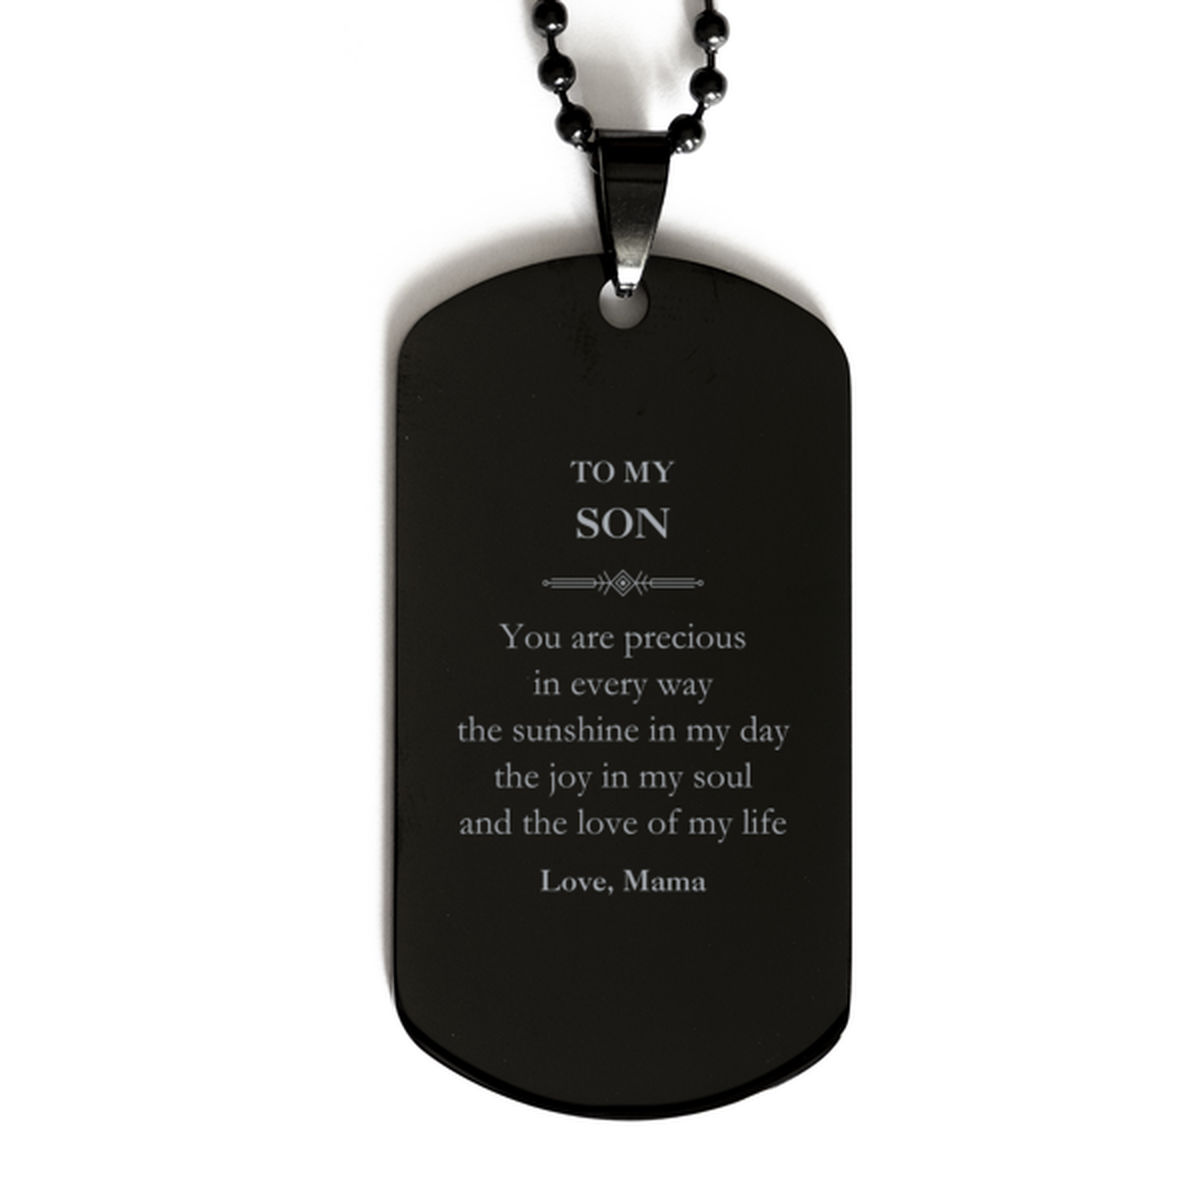 Graduation Gifts for Son Black Dog Tag Present from Mama, Christmas Son Birthday Gifts Son You are precious in every way the sunshine in my day. Love, Mama